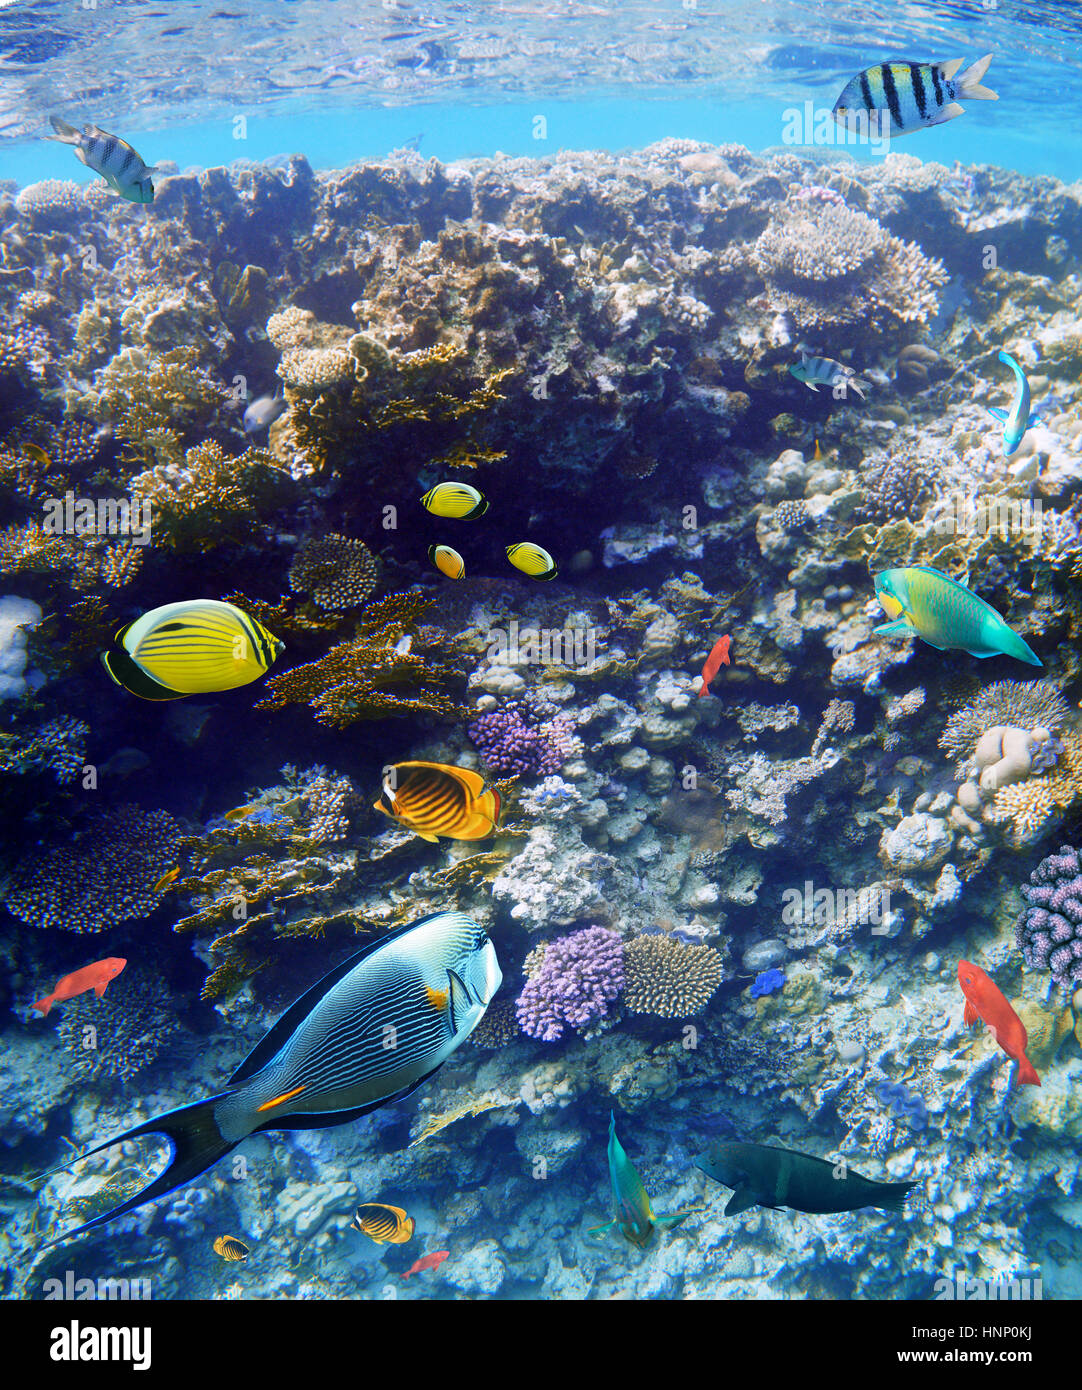 Colorful coral reef fishes of the Red Sea. Stock Photo